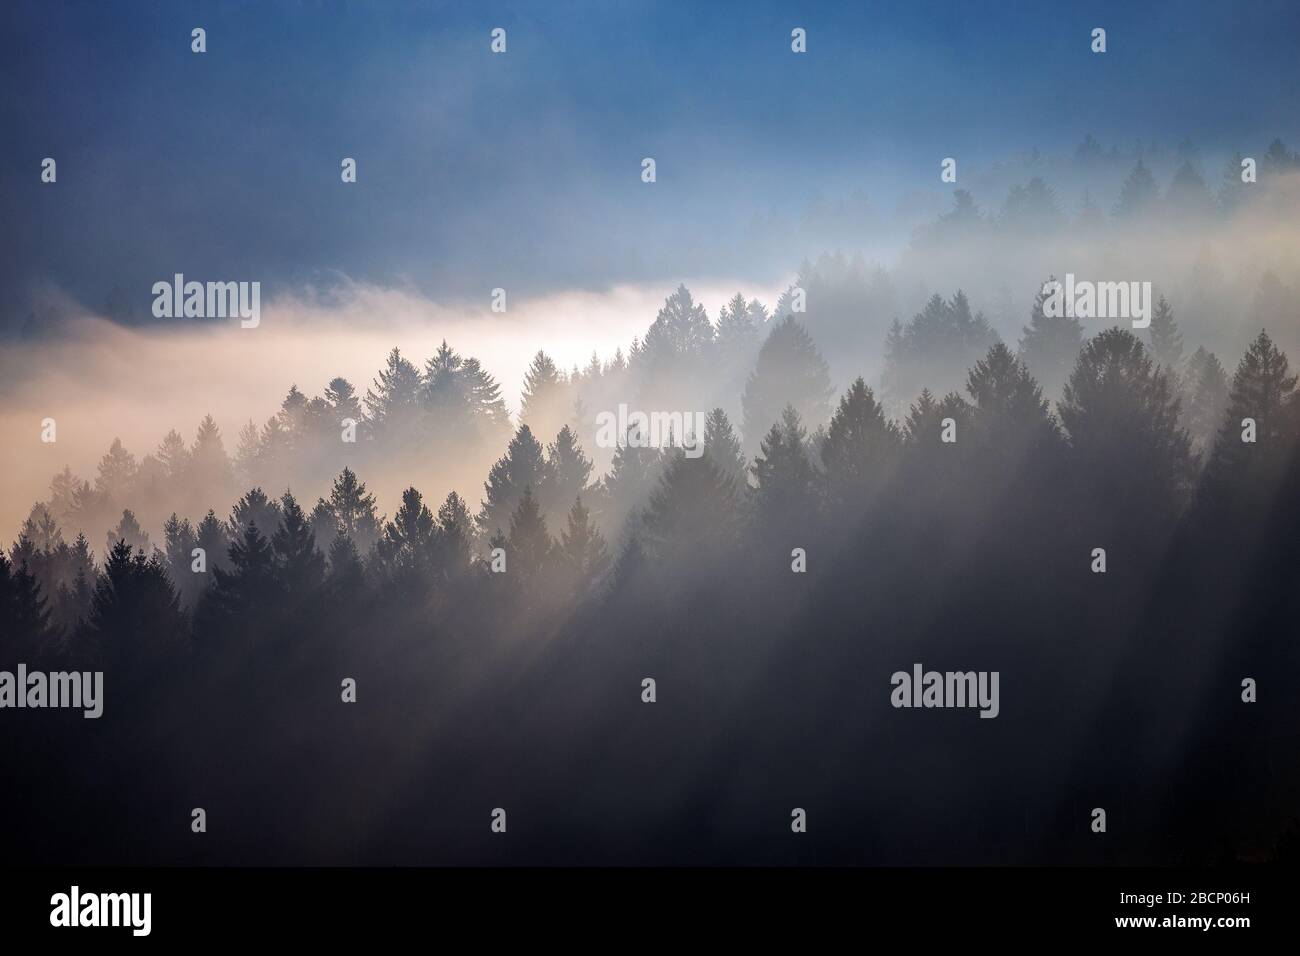 The Cansiglio coniferous forest. Sunlight at sunrise, beams of light on  trees through the fog. Evocative mountain landscape. Prealpi Venete, Italy. Stock Photo